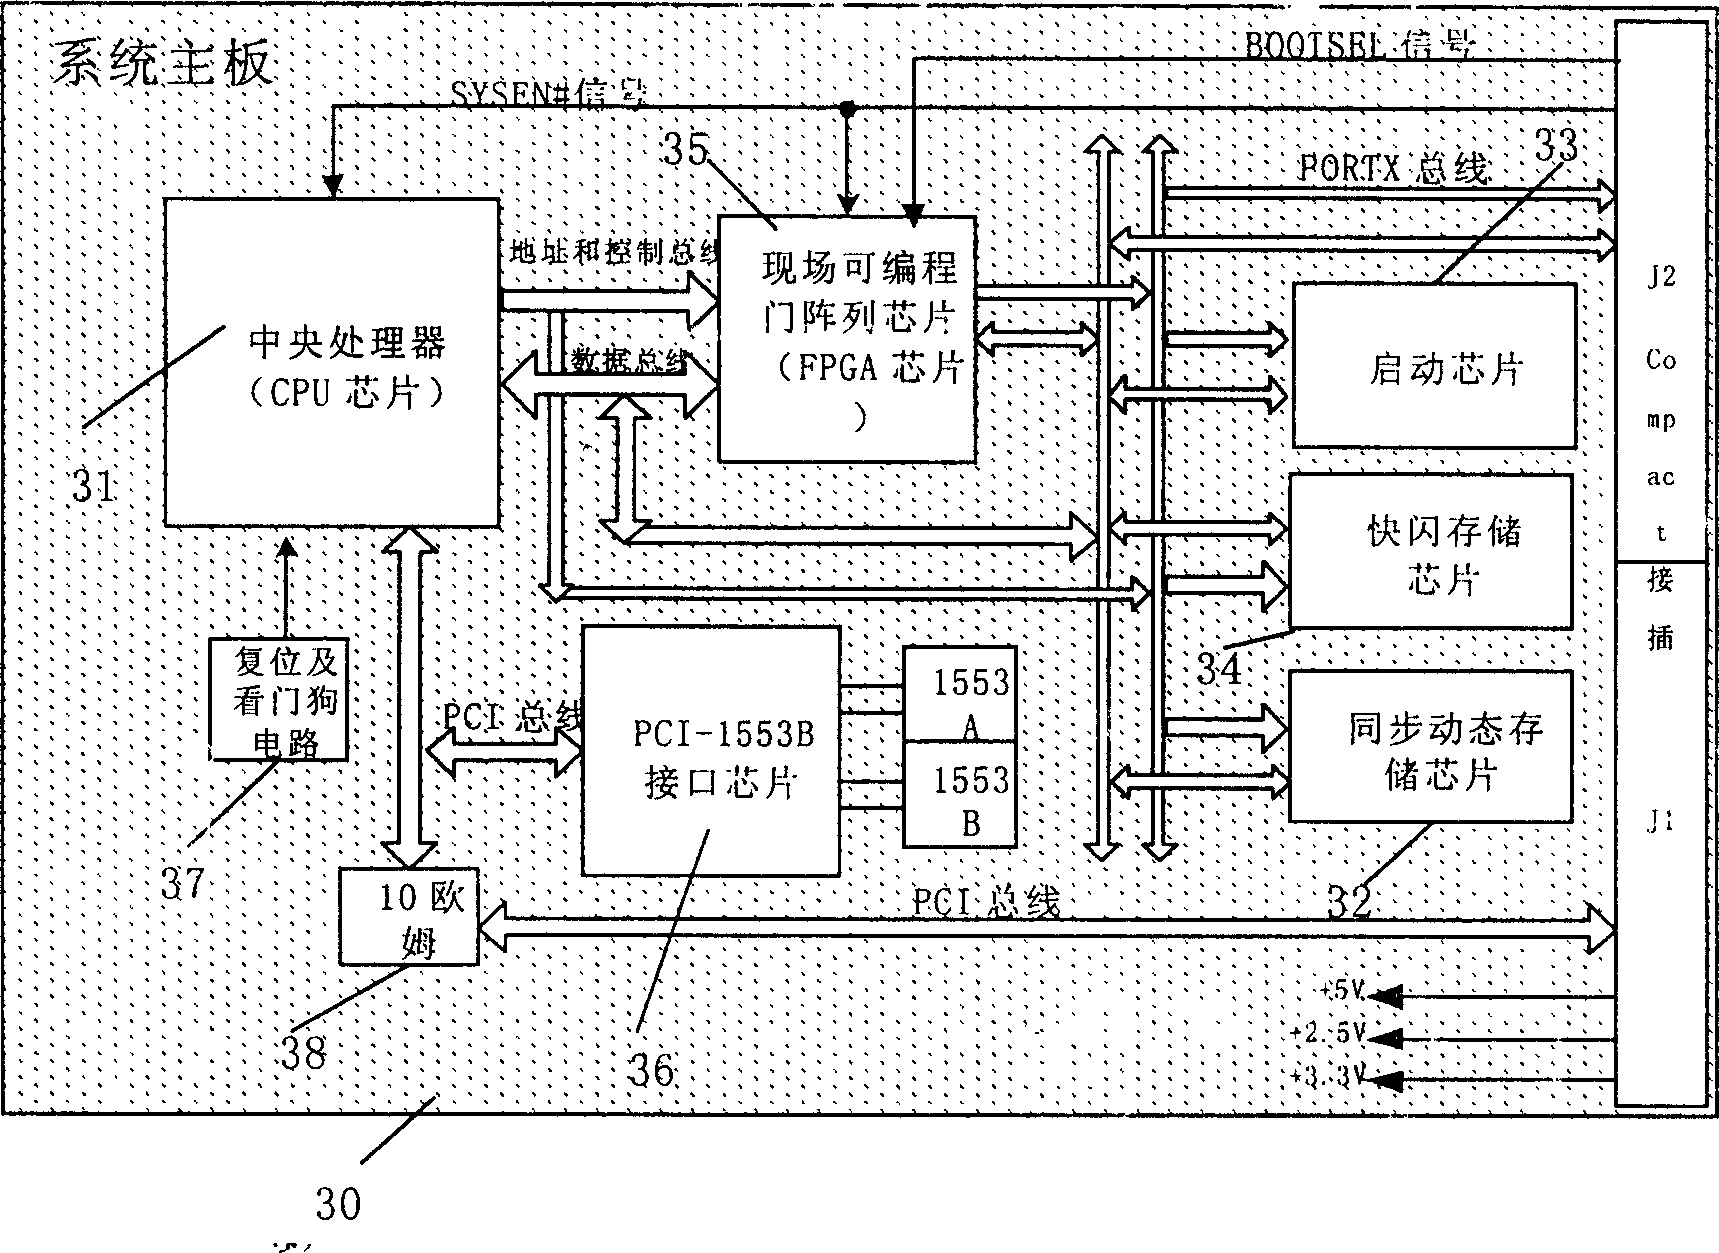 System mainboard for embedded computer systems